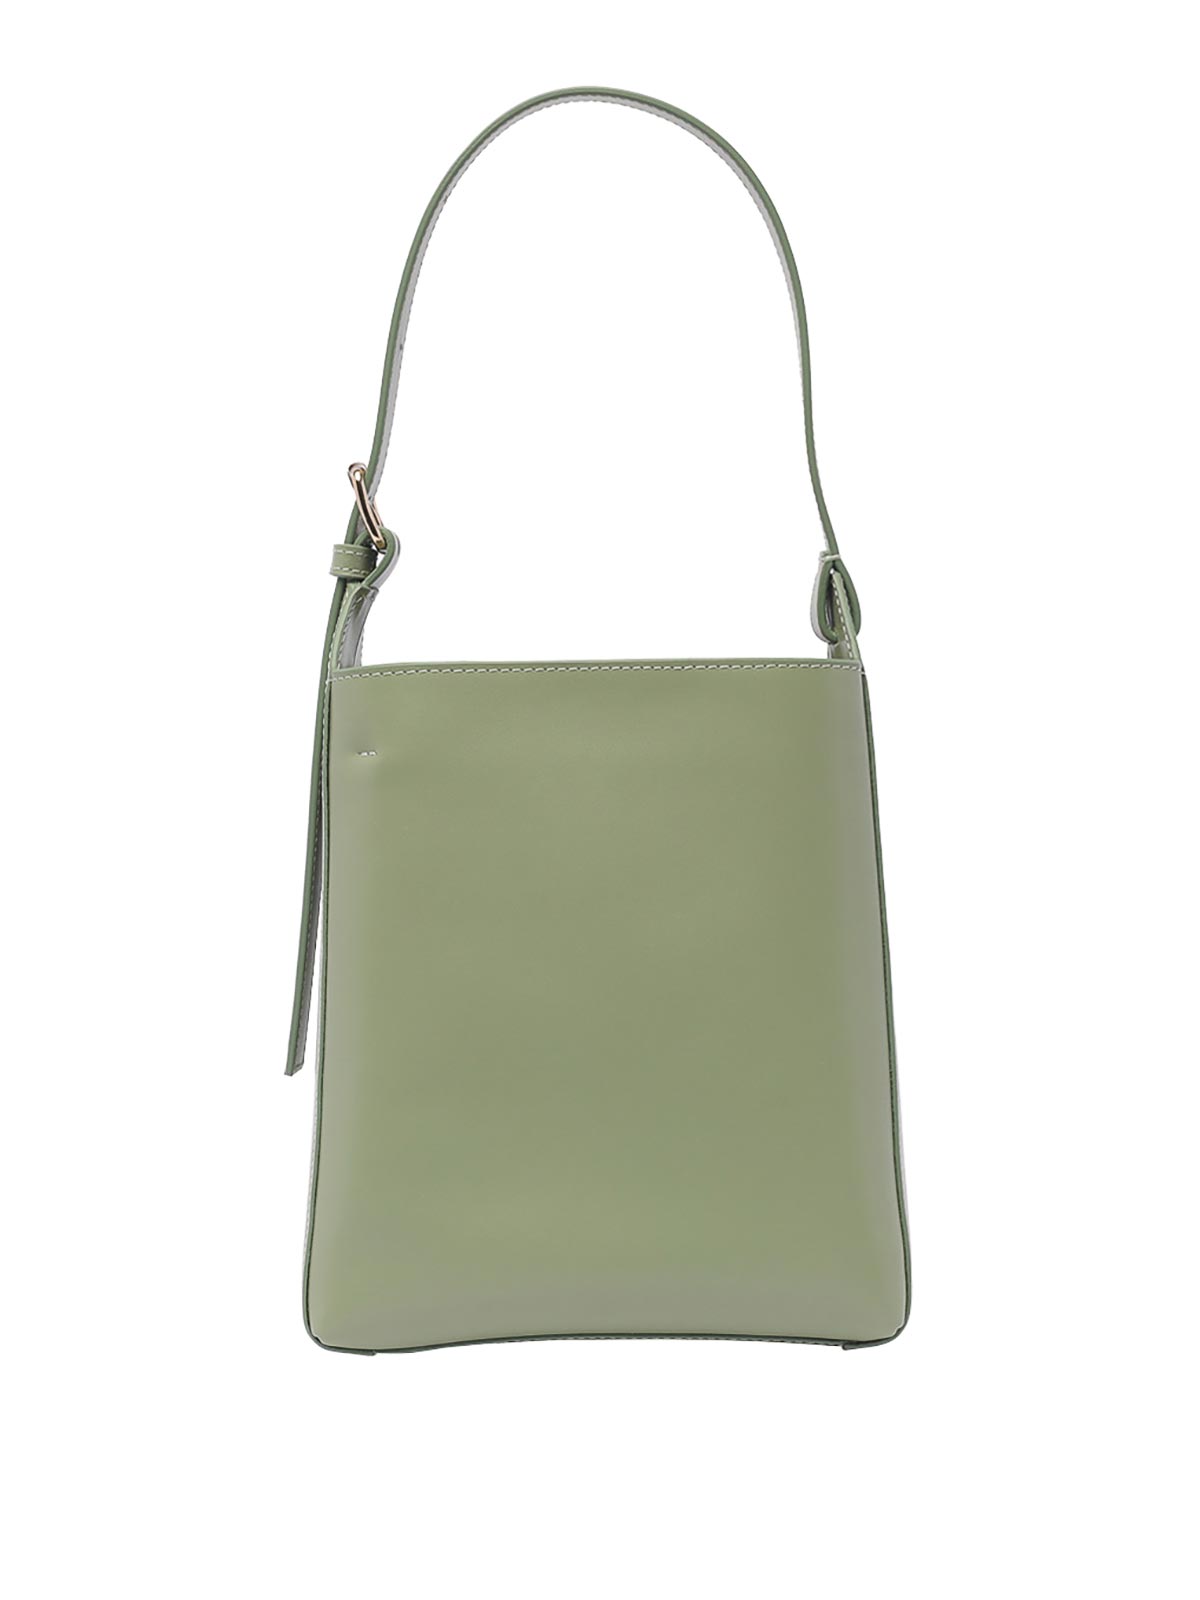 Sac virginie small leather shoulder bag - A.P.C. - Women